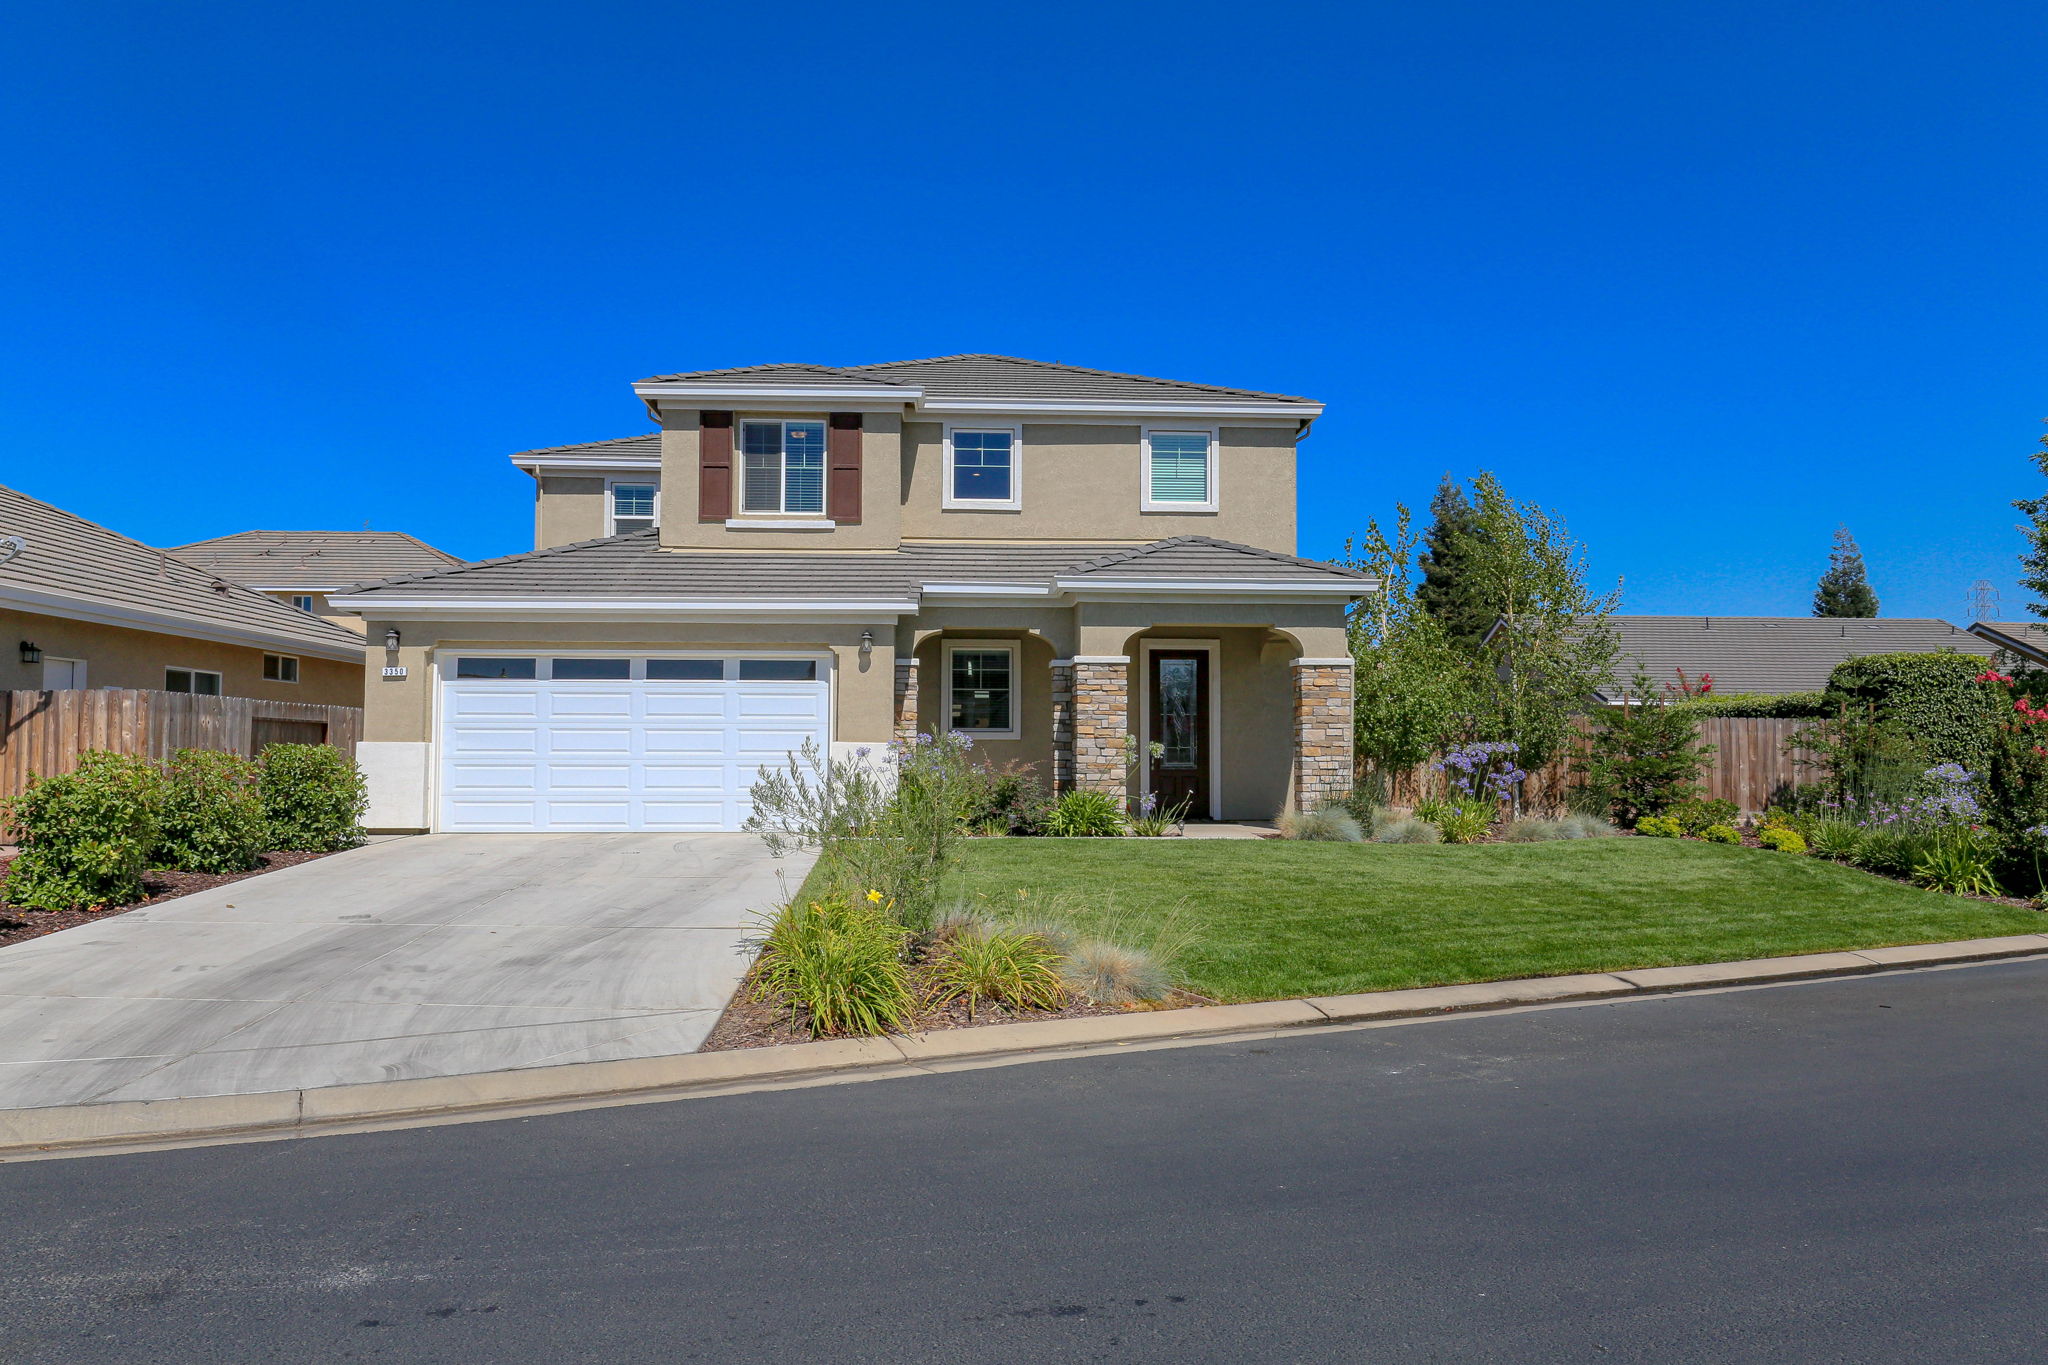  3350 Carriage Ln, Atwater, CA 95301, US